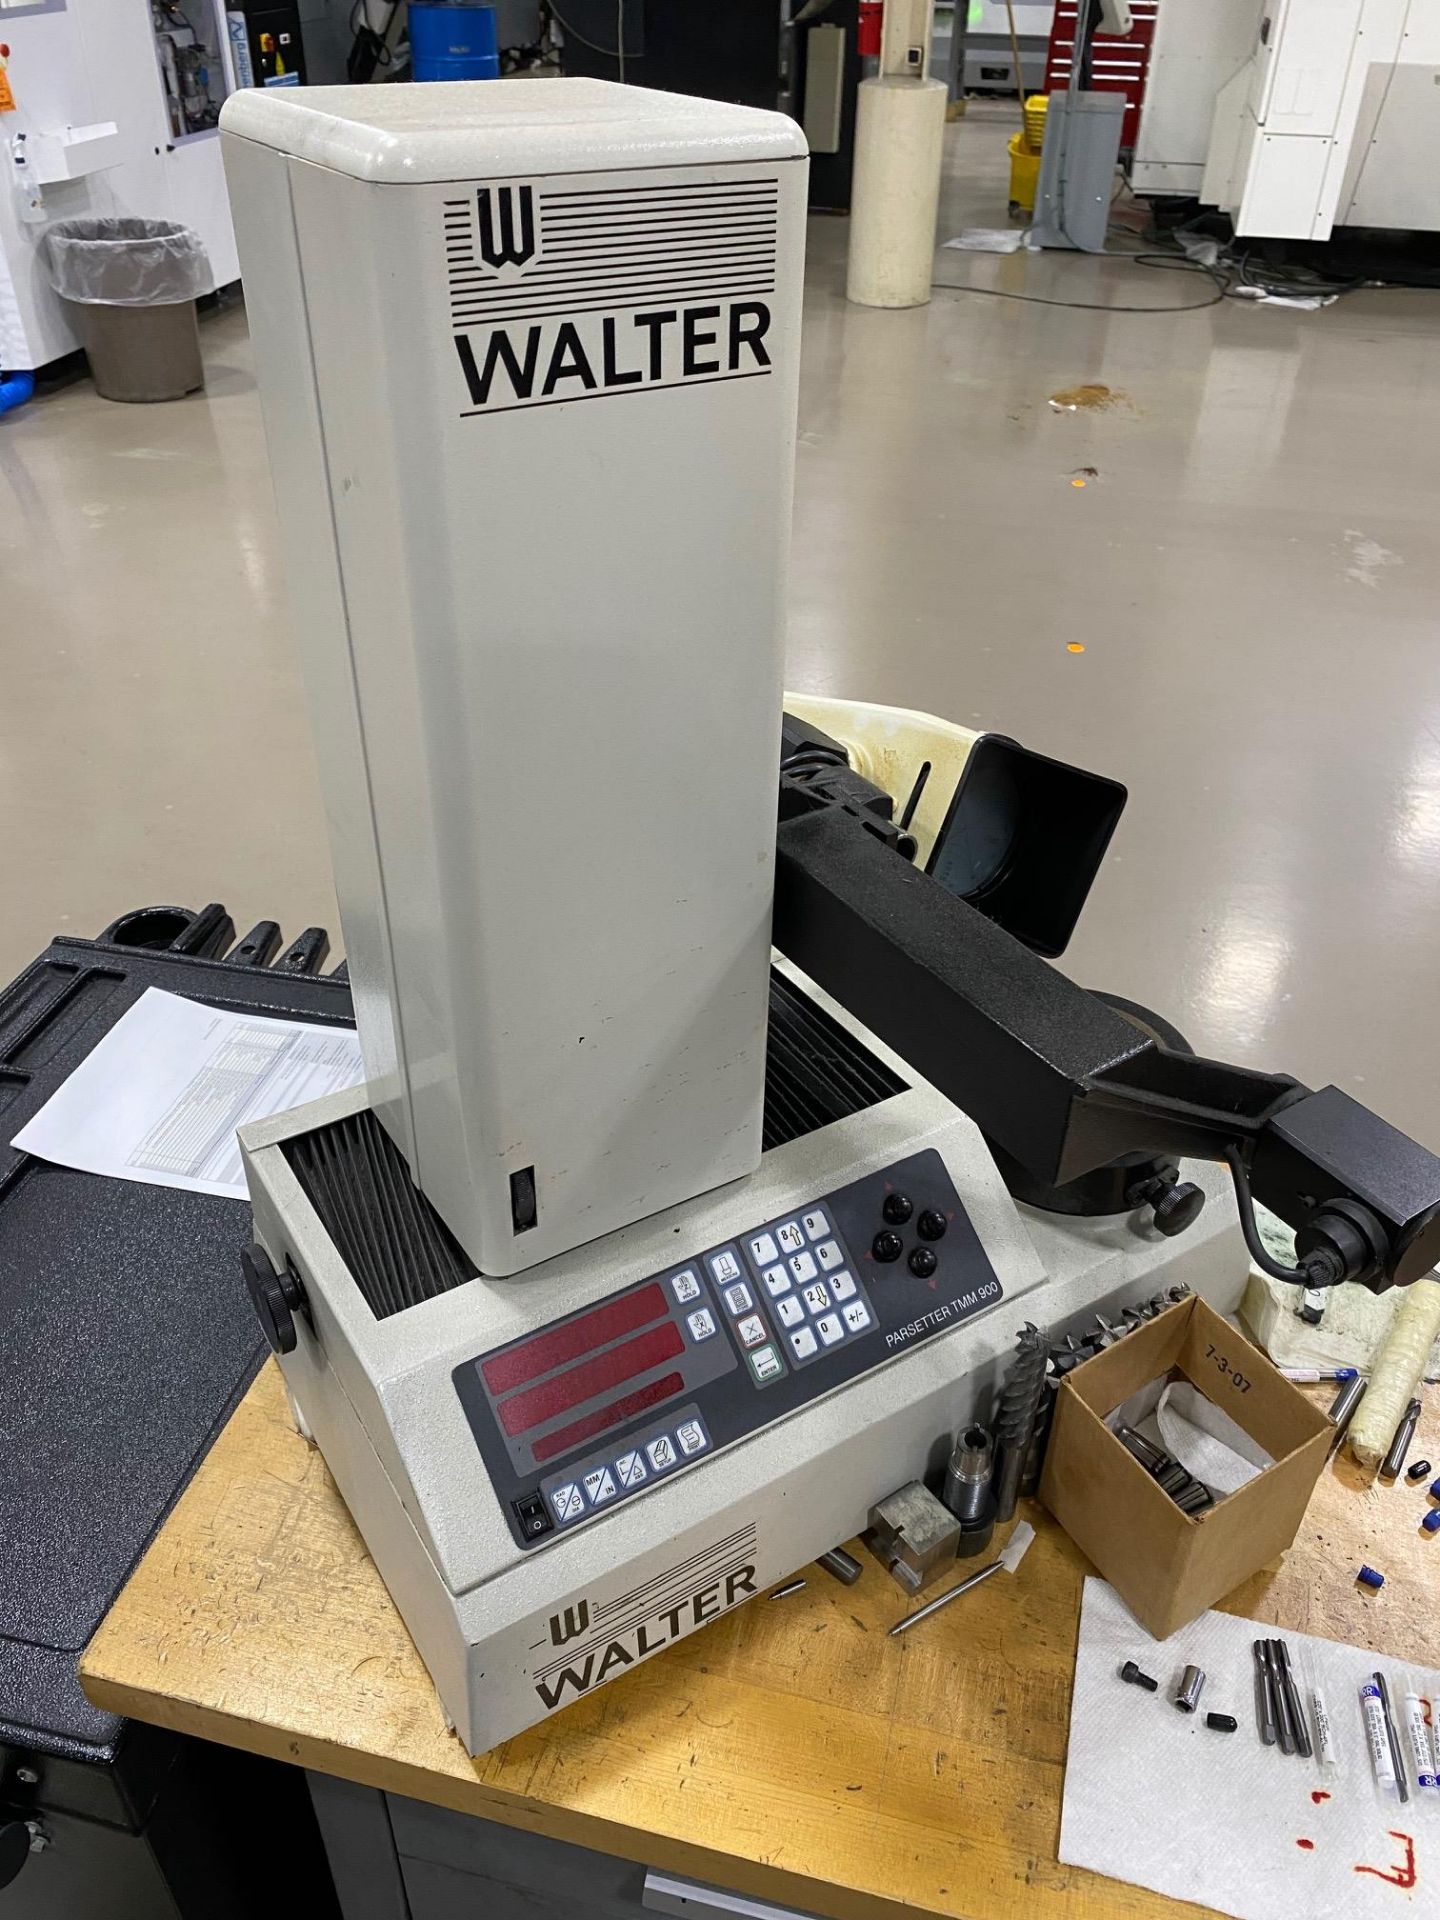 (Walter) Parlec Parsetter TMM 900 Precision Tool Measuring System